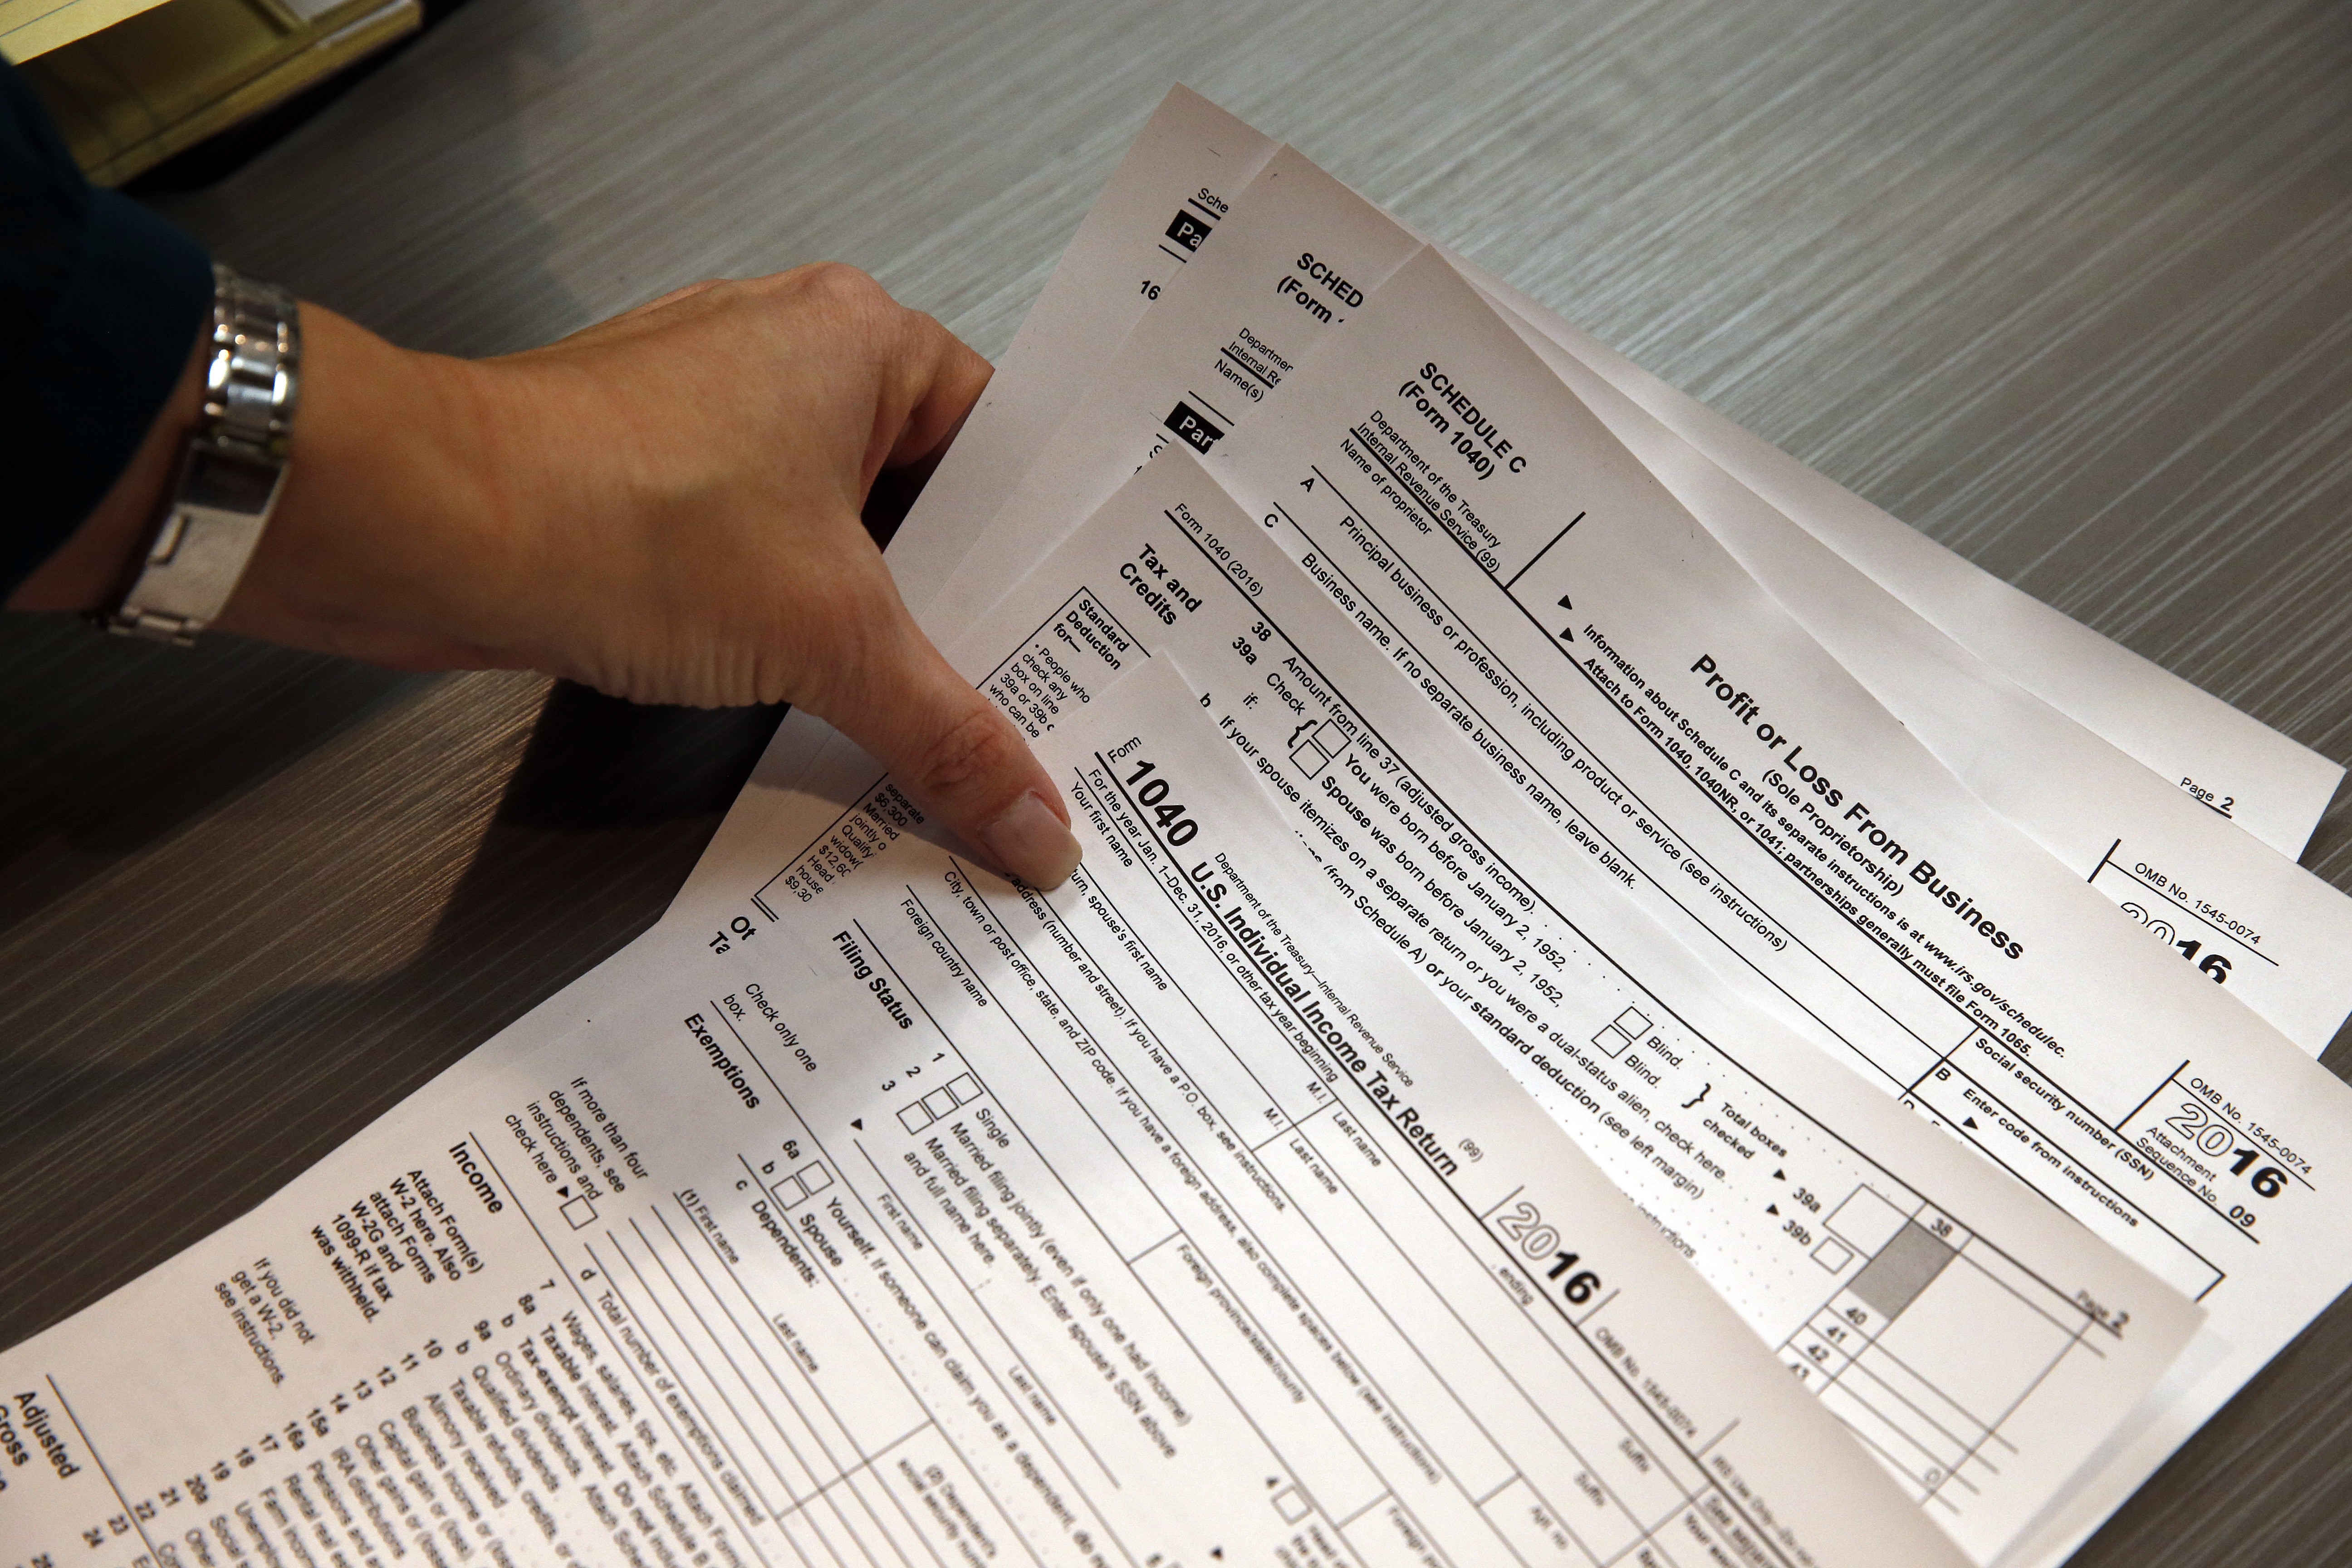 Americans spend an average of 54 hours doing their taxes